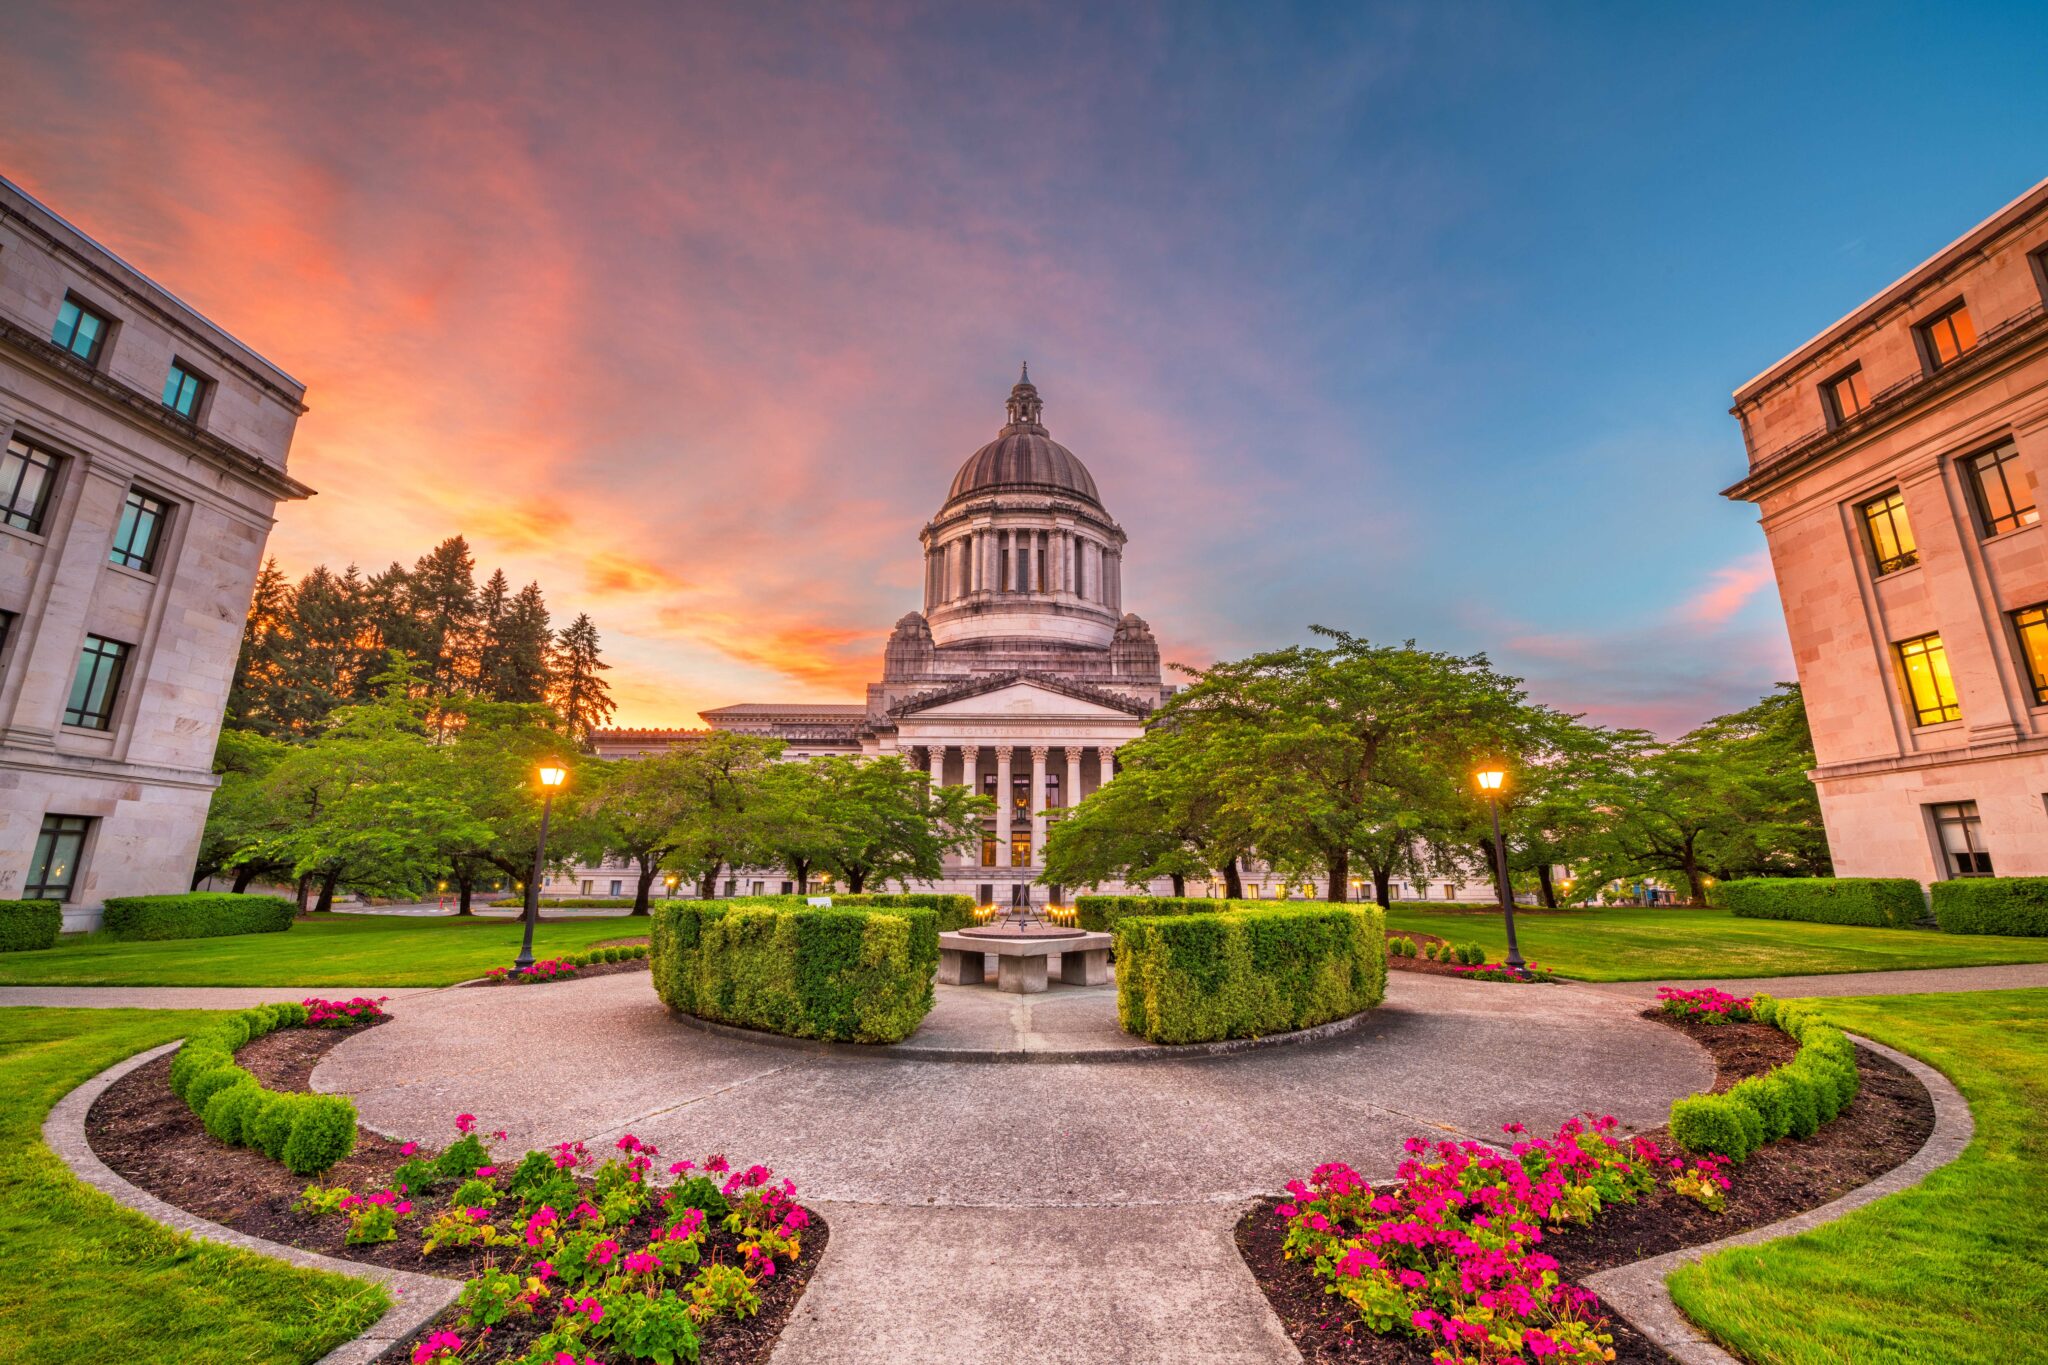 The capitol building in Olympia at sunset with gardens surrounding it.